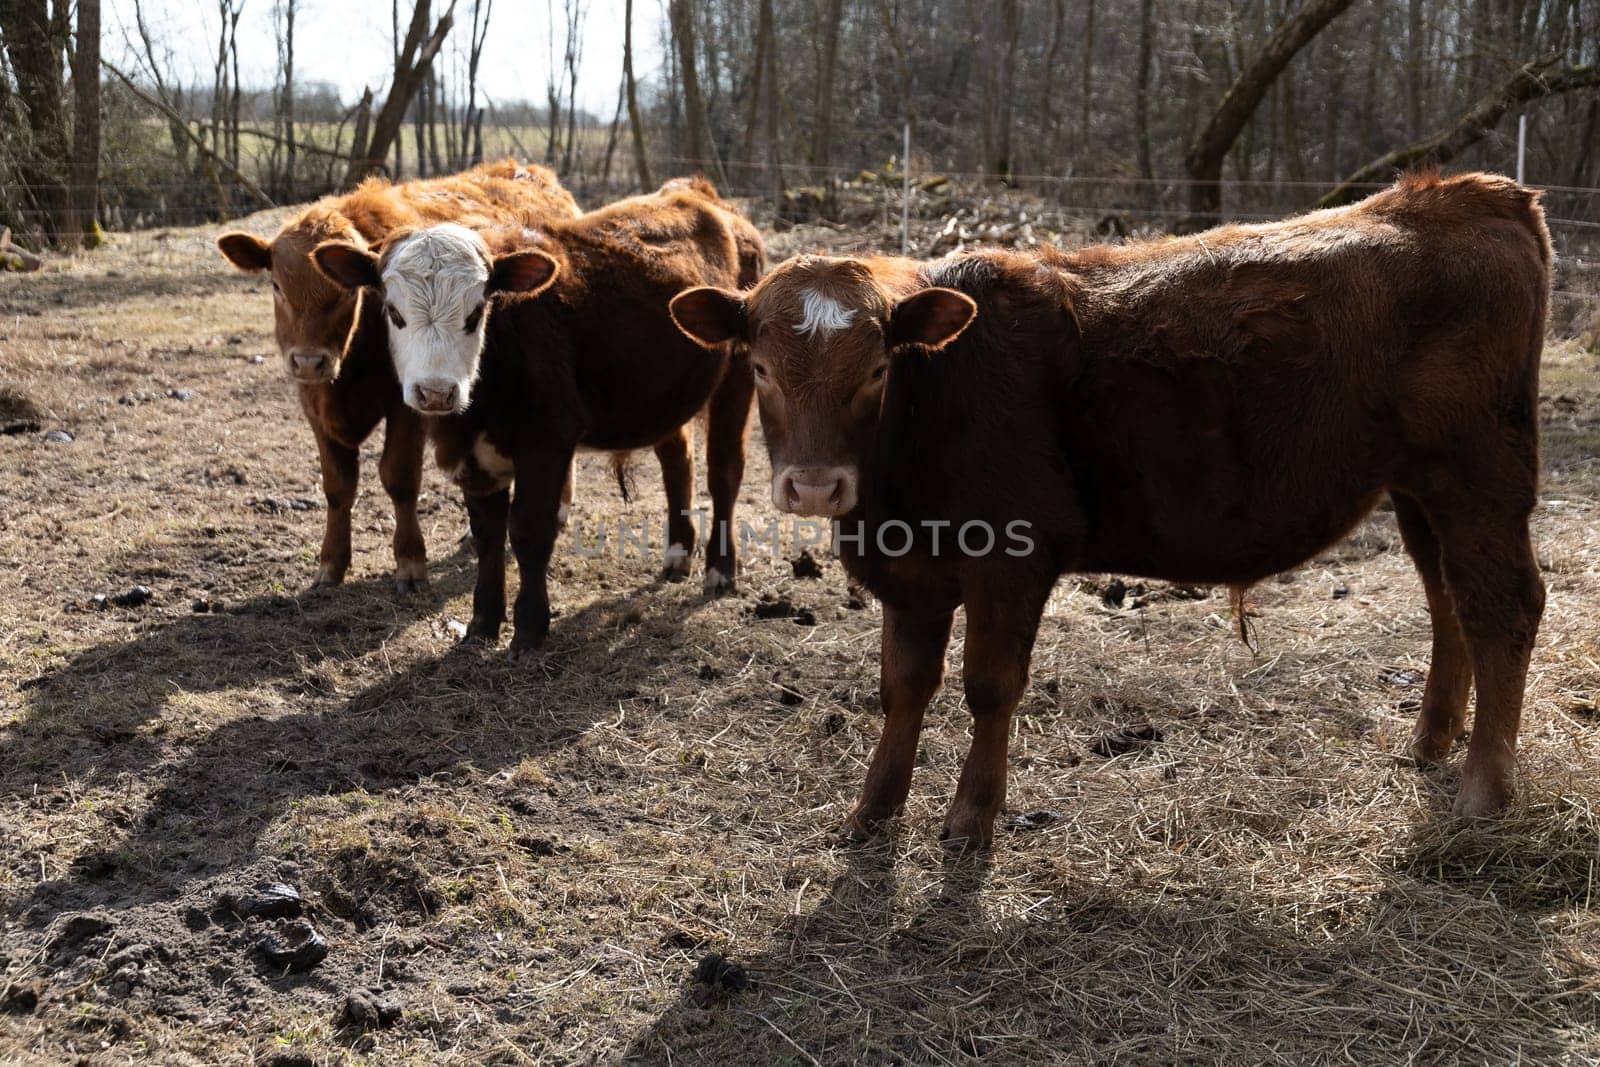 Several brown cows are standing together on a dry grass field. The cows are grazing and looking around the field under the clear sky.